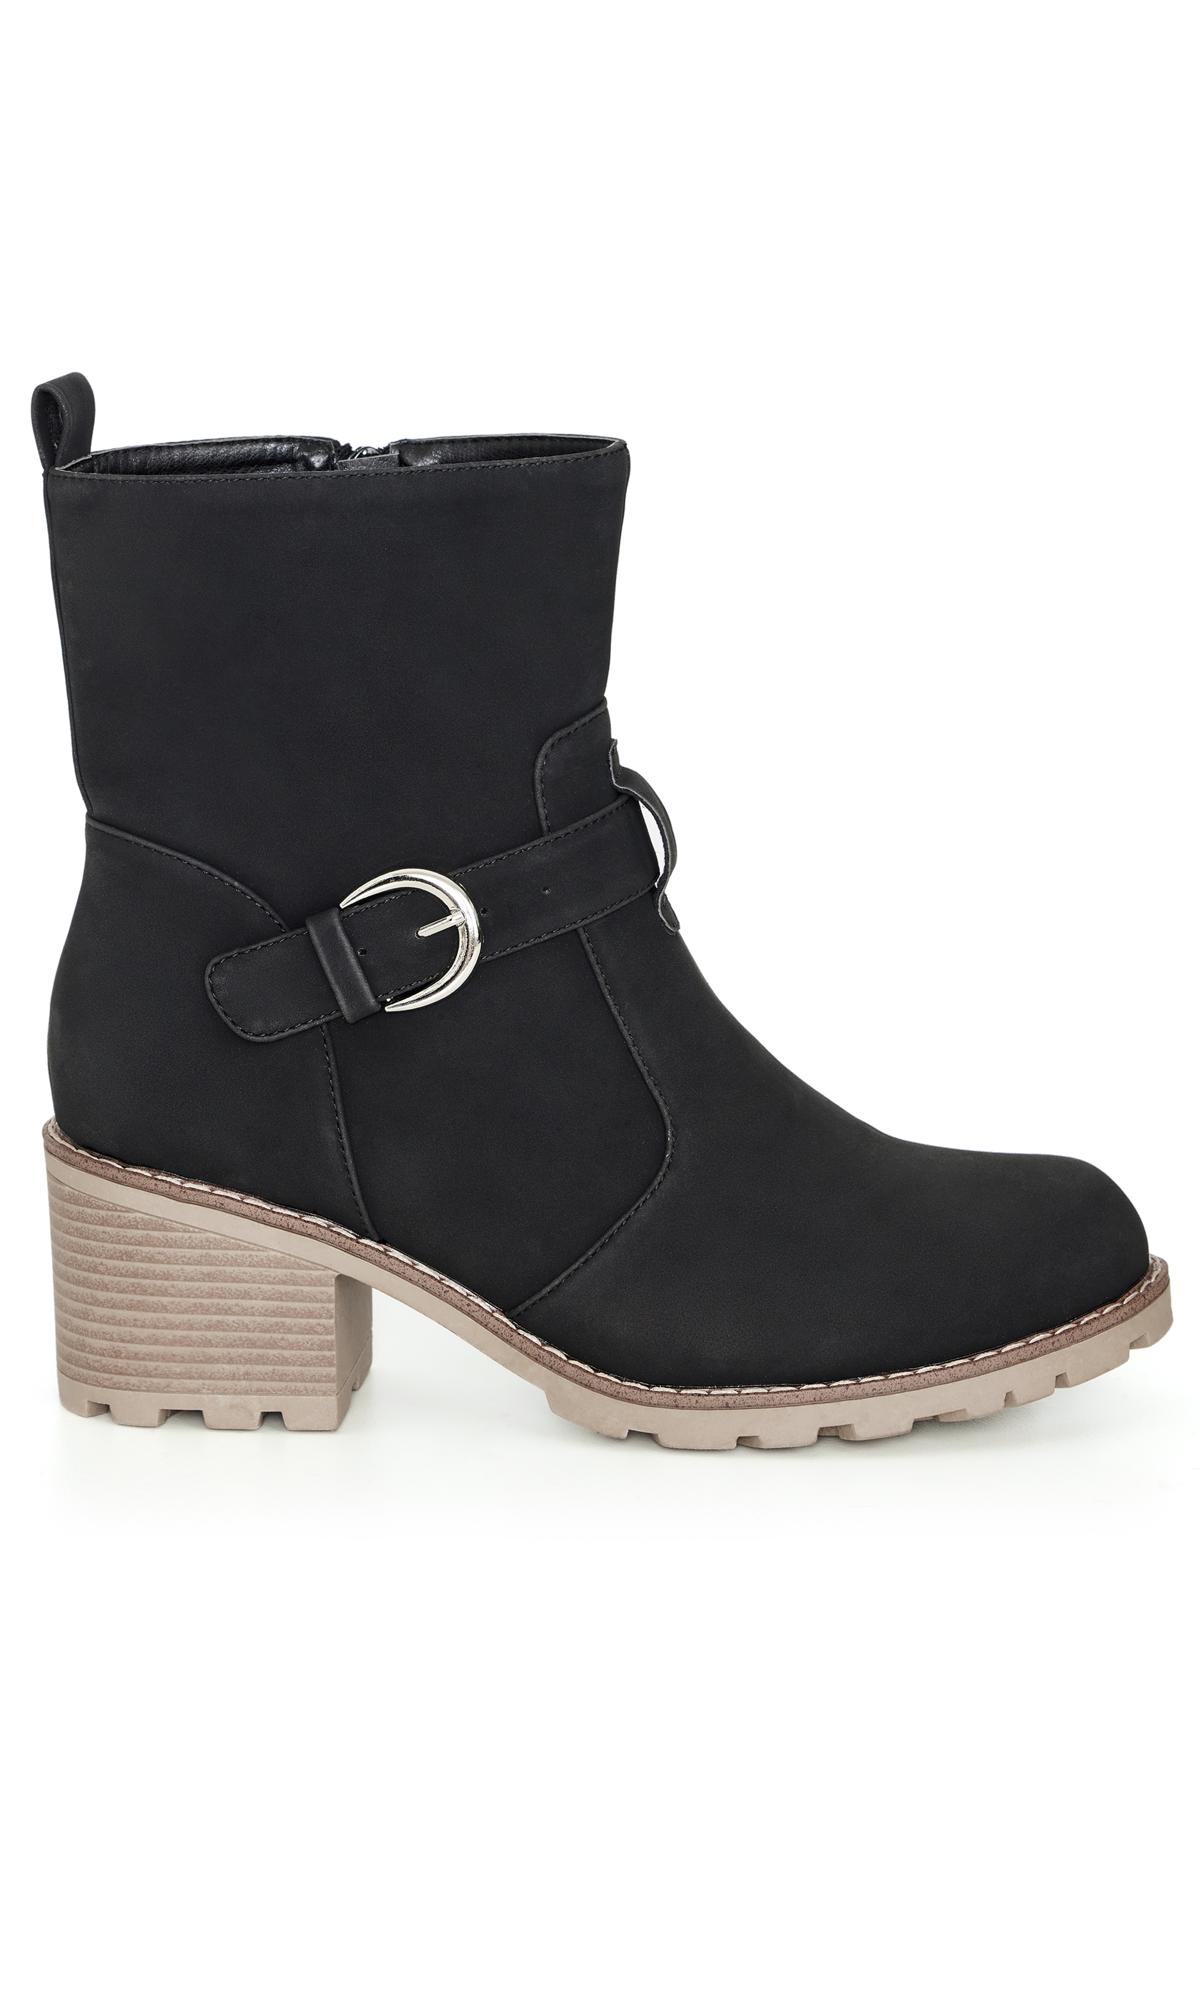 Claire Black Mid Boot 2